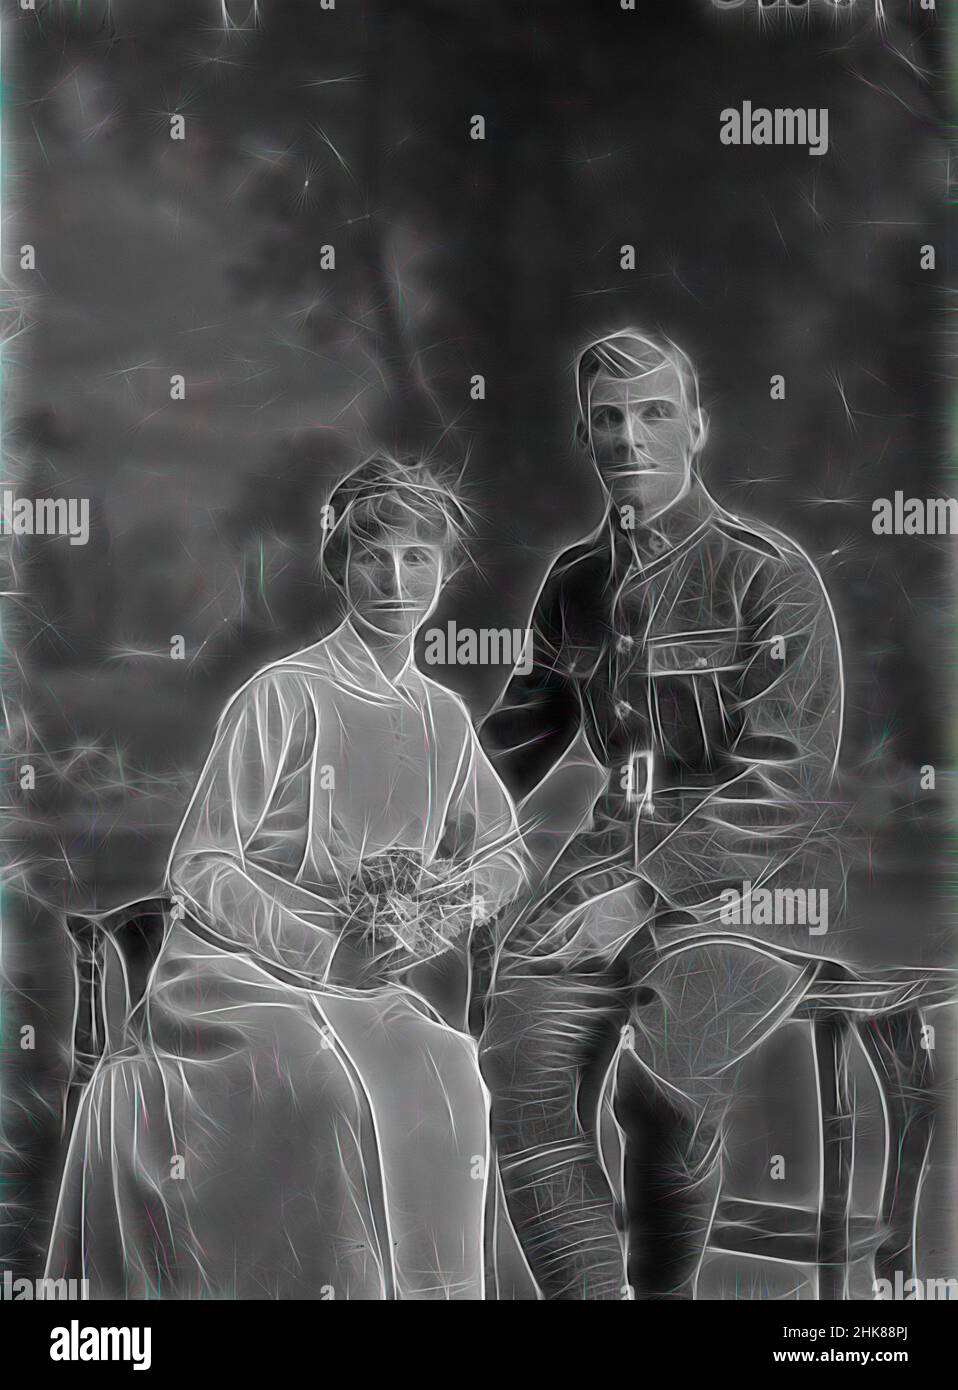 Inspired by James Arthur Hoverd and his bride Florence Lilian Davies, Berry & Co, photography studio, 20 July 1918, Wellington, Wedding portrait of Private James Arthur Hoverd and Florence Lilian Hoverd, Reimagined by Artotop. Classic art reinvented with a modern twist. Design of warm cheerful glowing of brightness and light ray radiance. Photography inspired by surrealism and futurism, embracing dynamic energy of modern technology, movement, speed and revolutionize culture Stock Photo